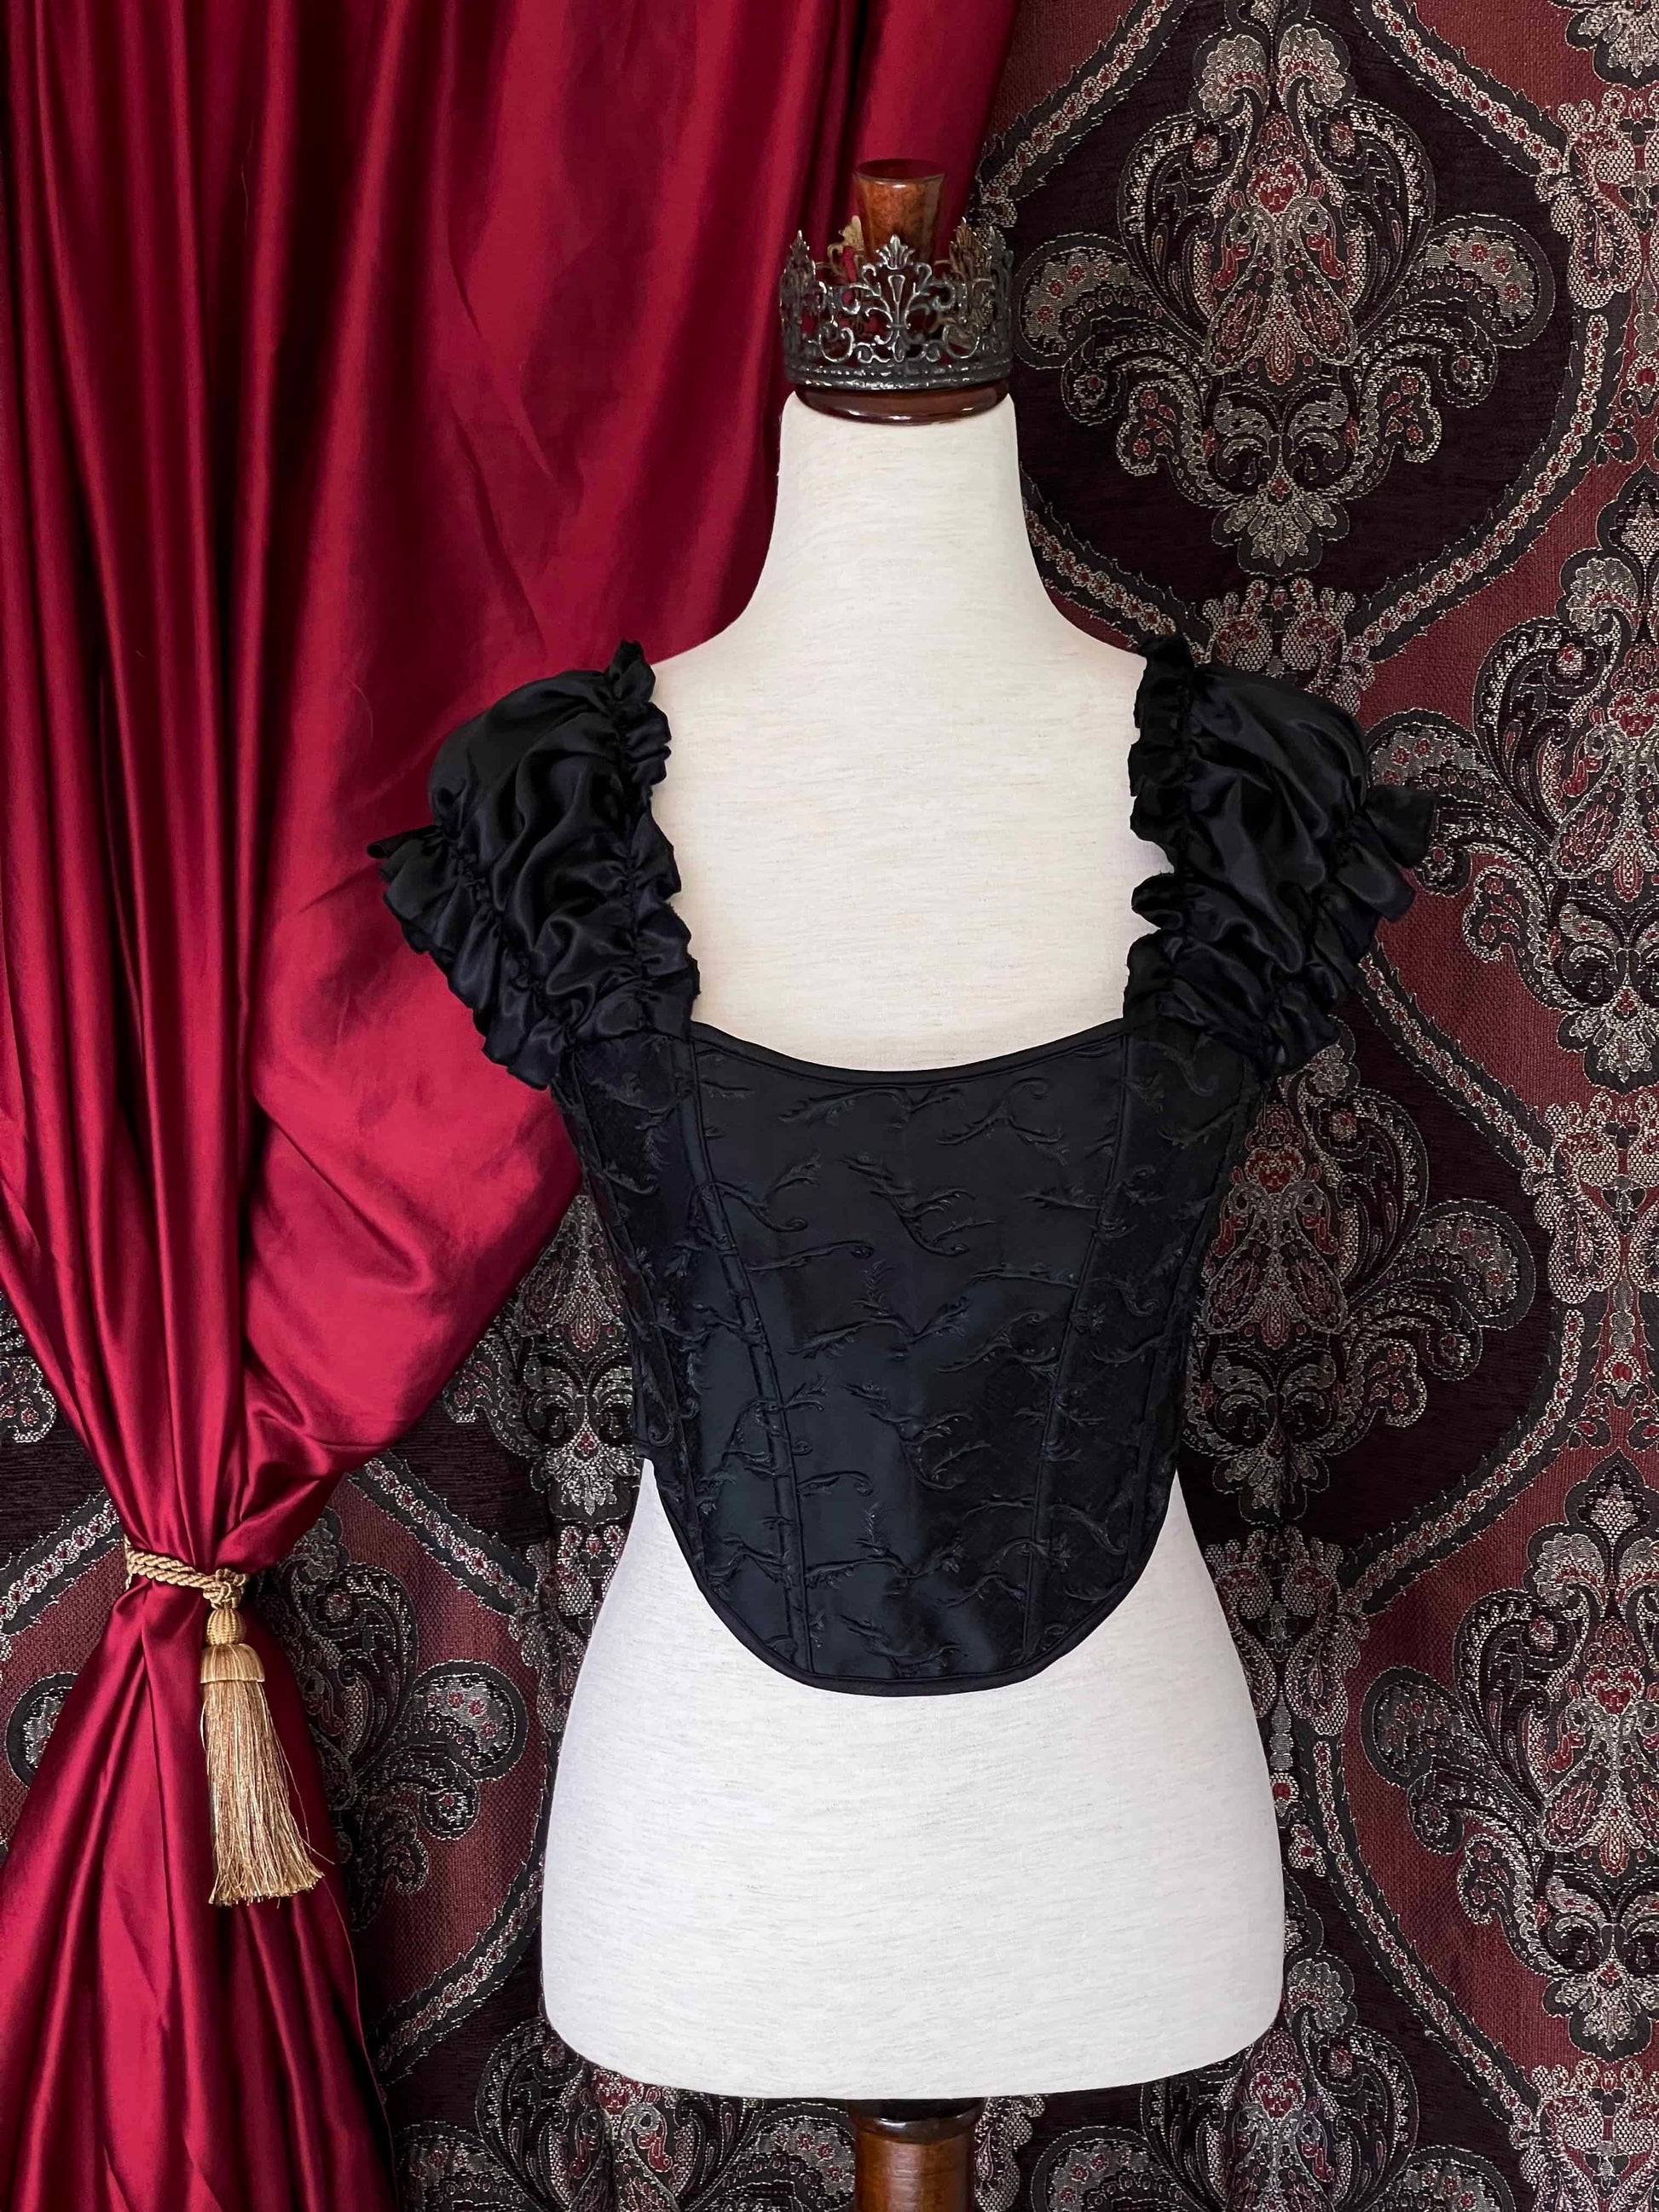 A historically inspired renaissance and baroque era corset  made of black embroidered fabric and puff sleeves is pictured on a mannequin in front of an ornate backdrop.